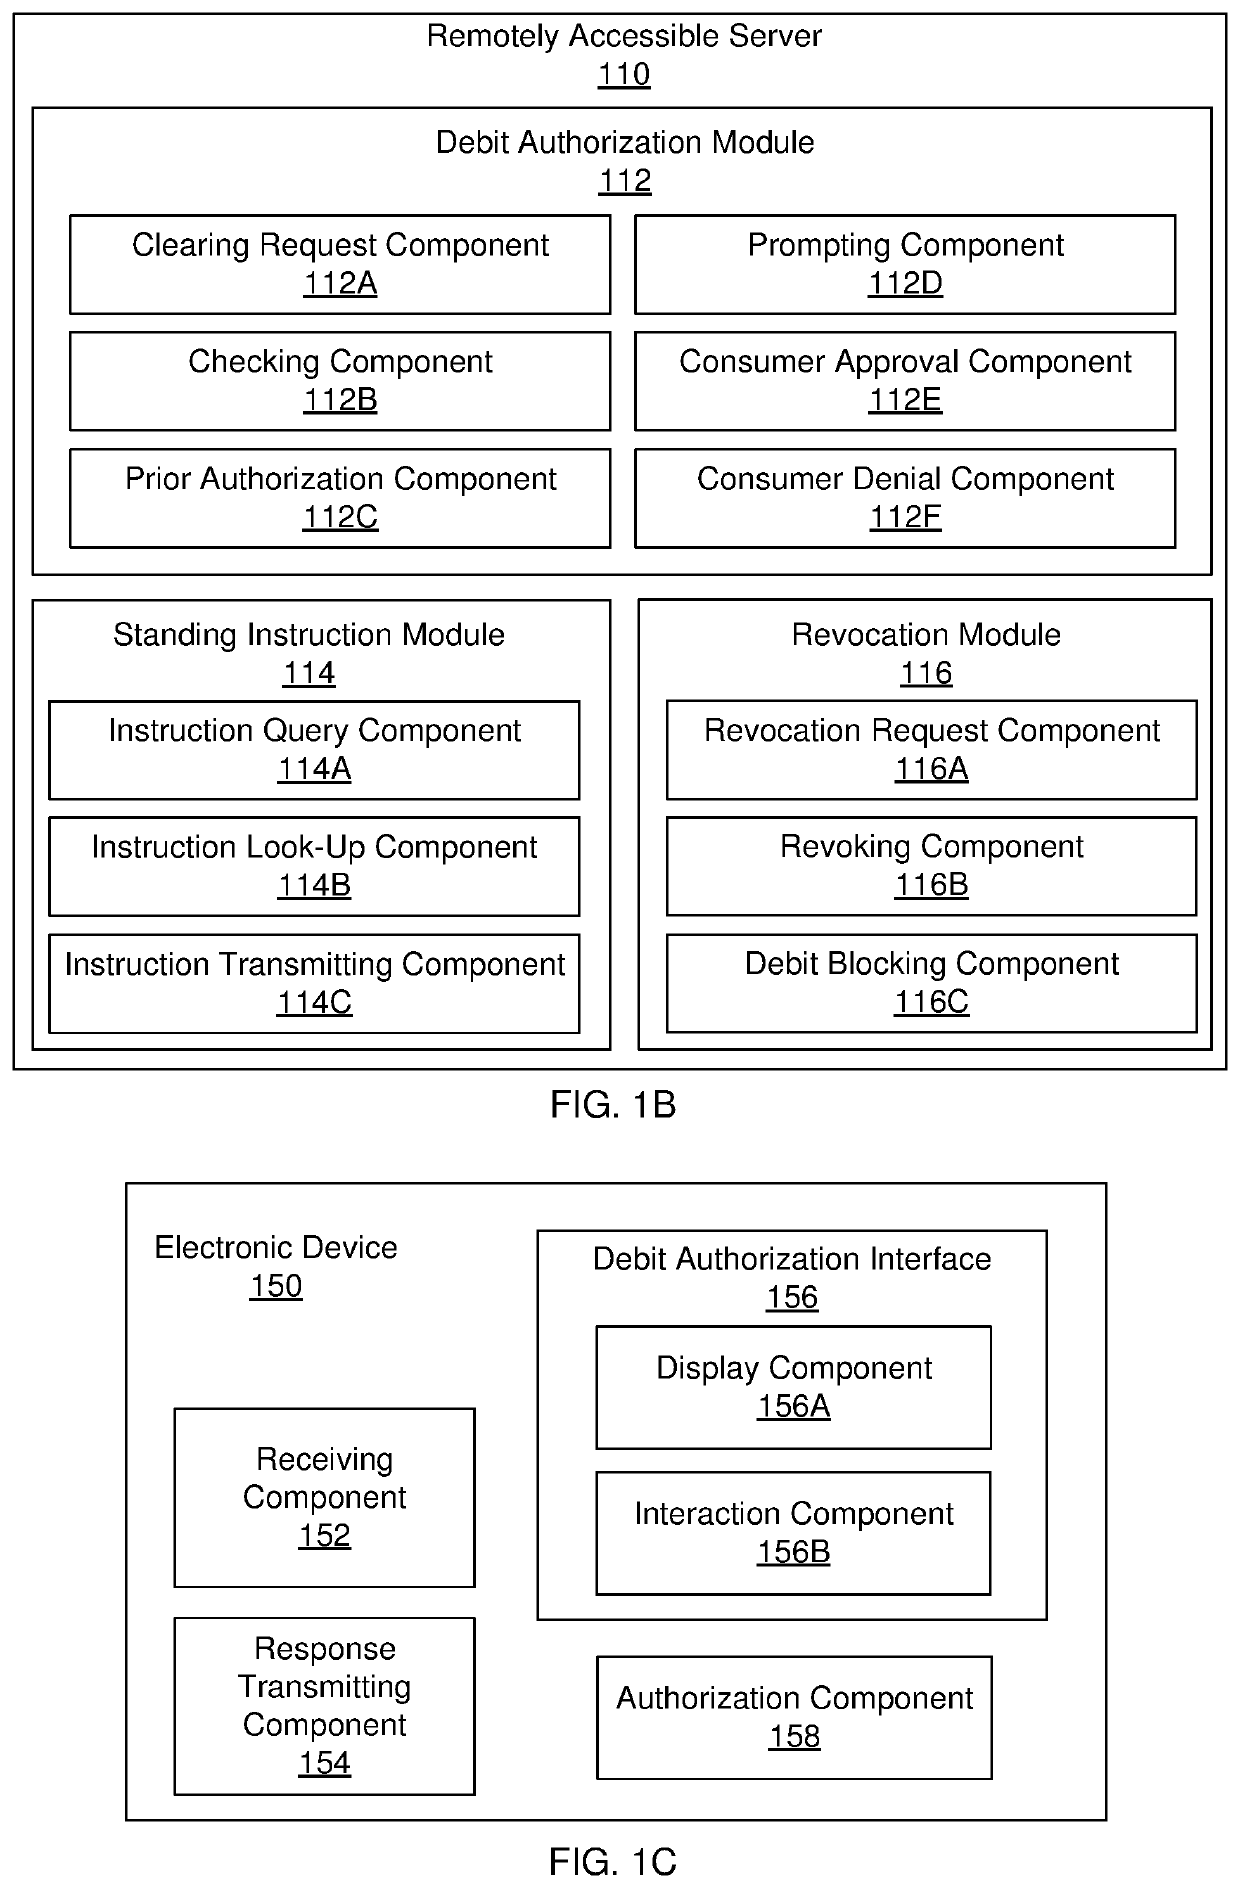 System and method for authorizing direct debit transactions